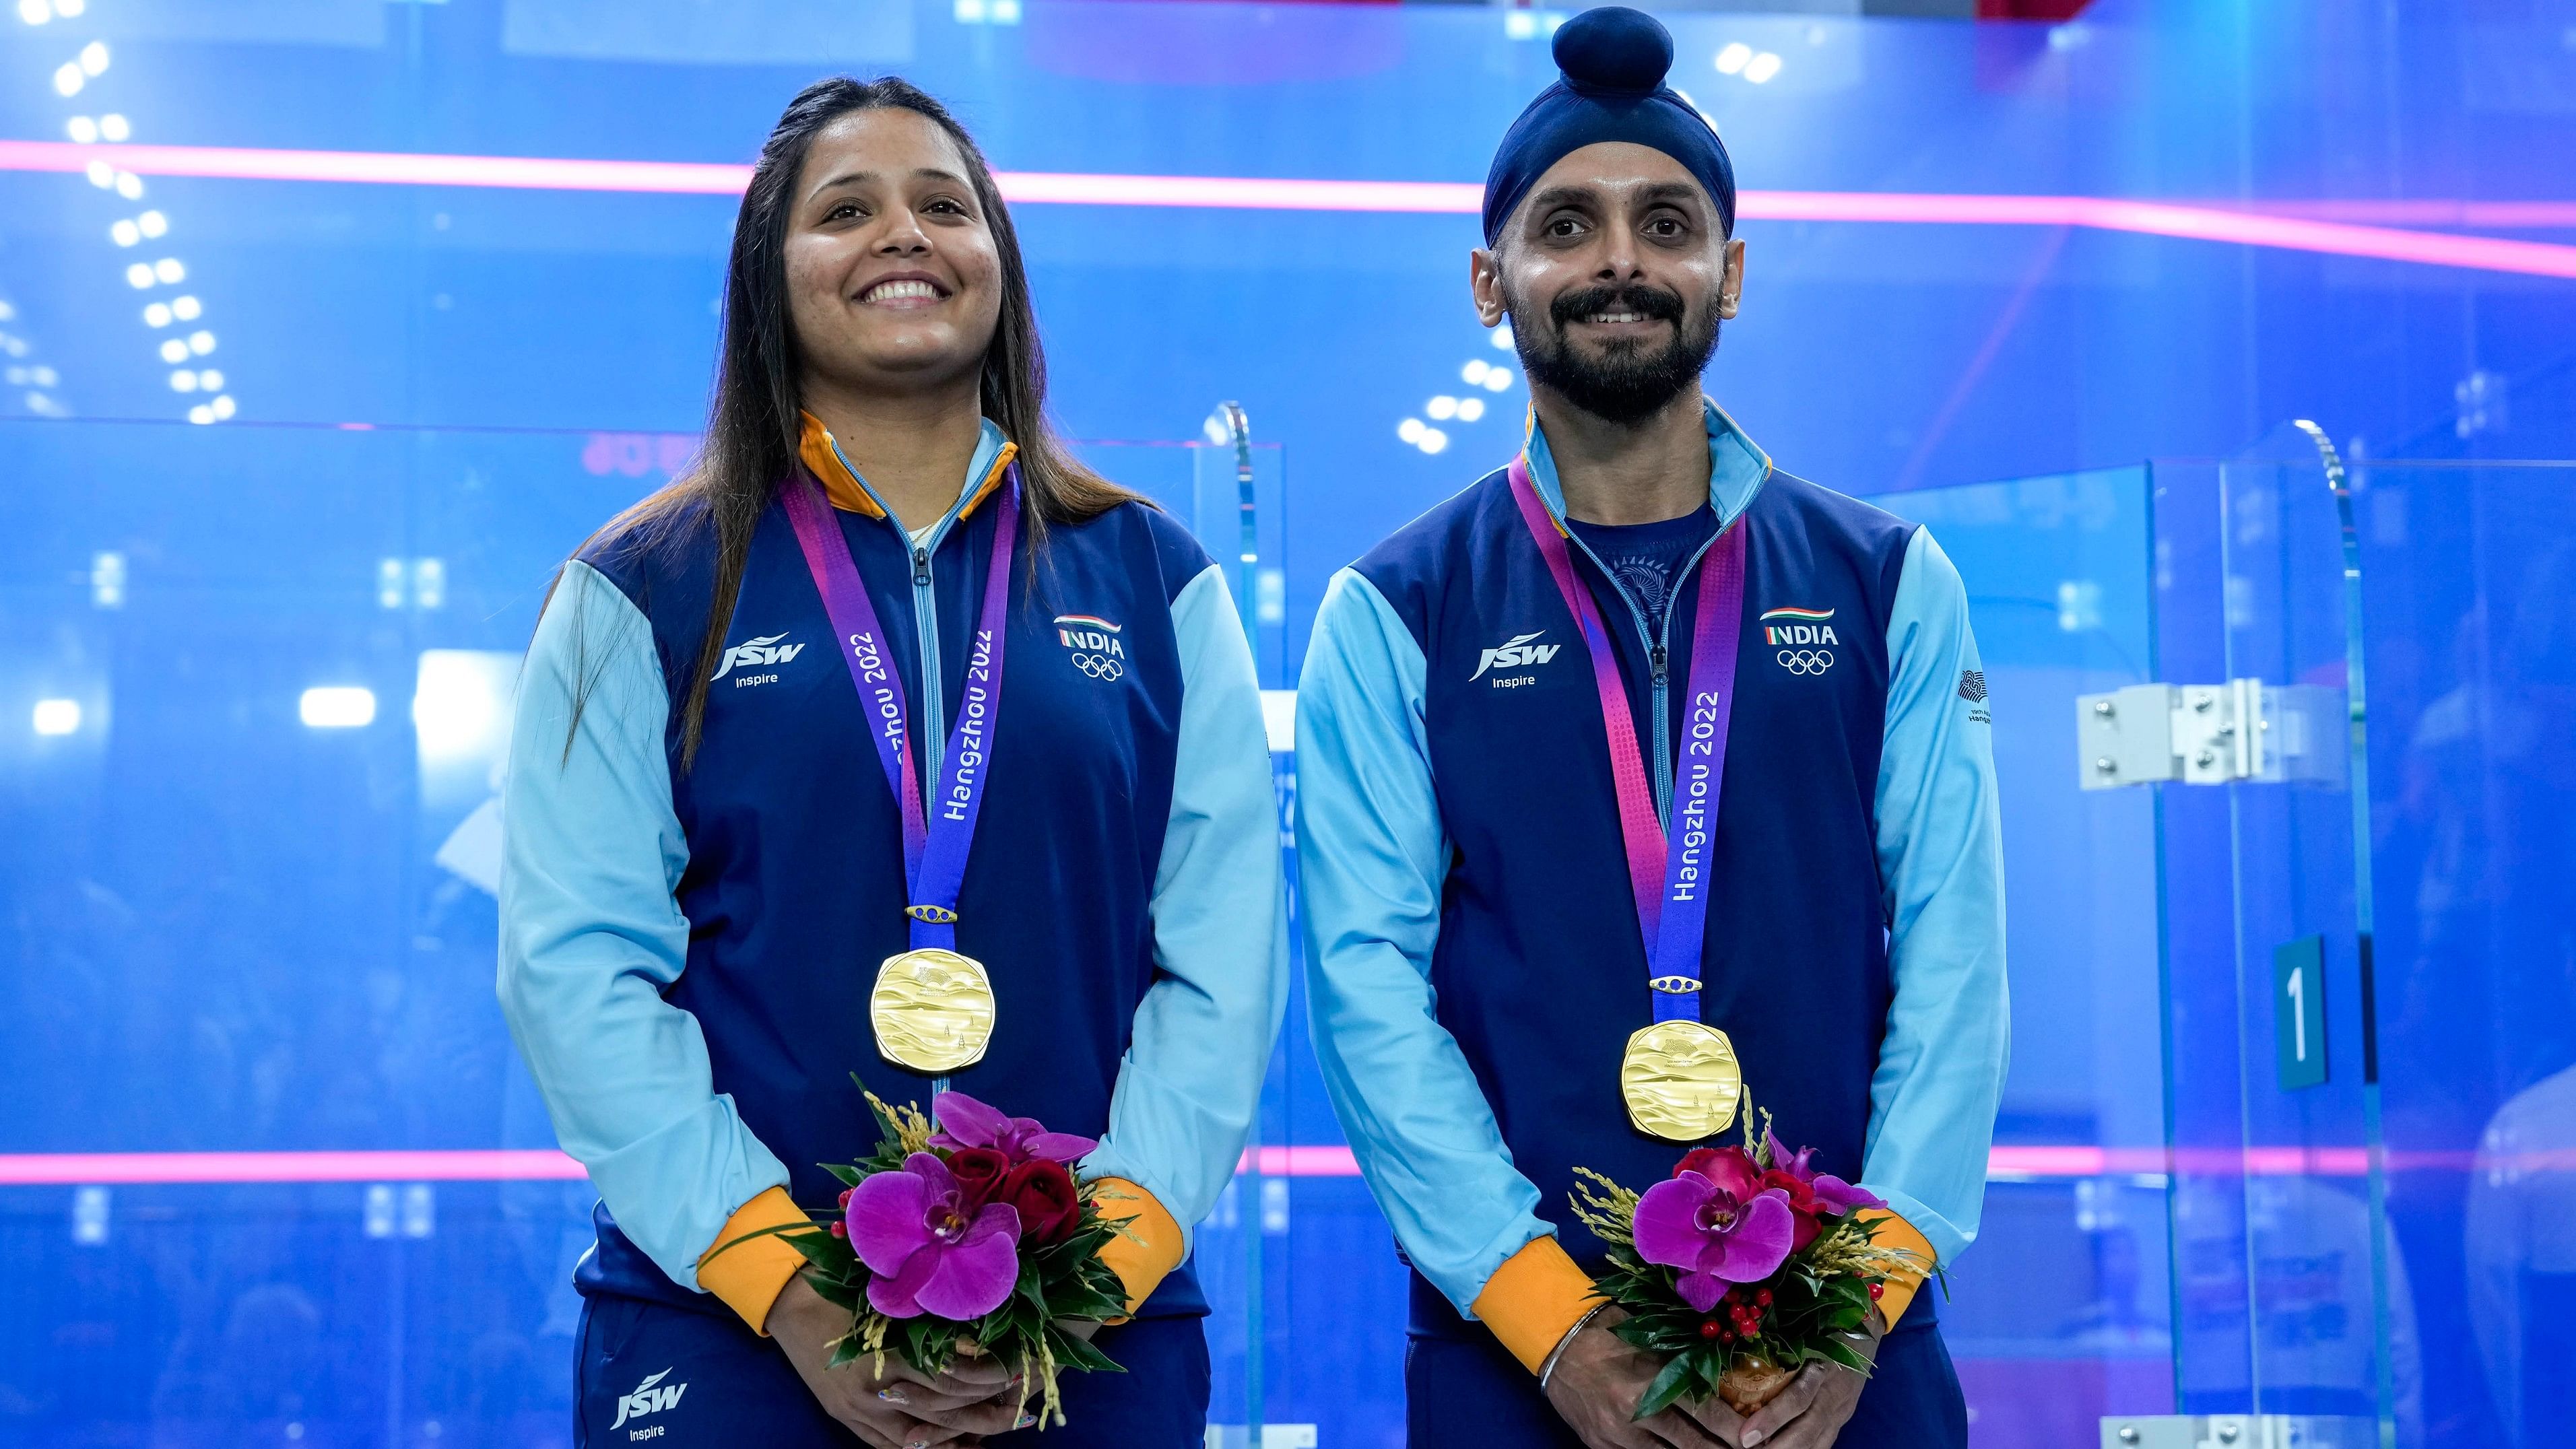 <div class="paragraphs"><p>Gold medalists India’s Dipika Pallikal and Harinder Pal Singh Sandhu pose for photos during the presentation ceremony of the Mixed Doubles Squash event at the 19th Asian Games, in Hangzhou.</p></div>